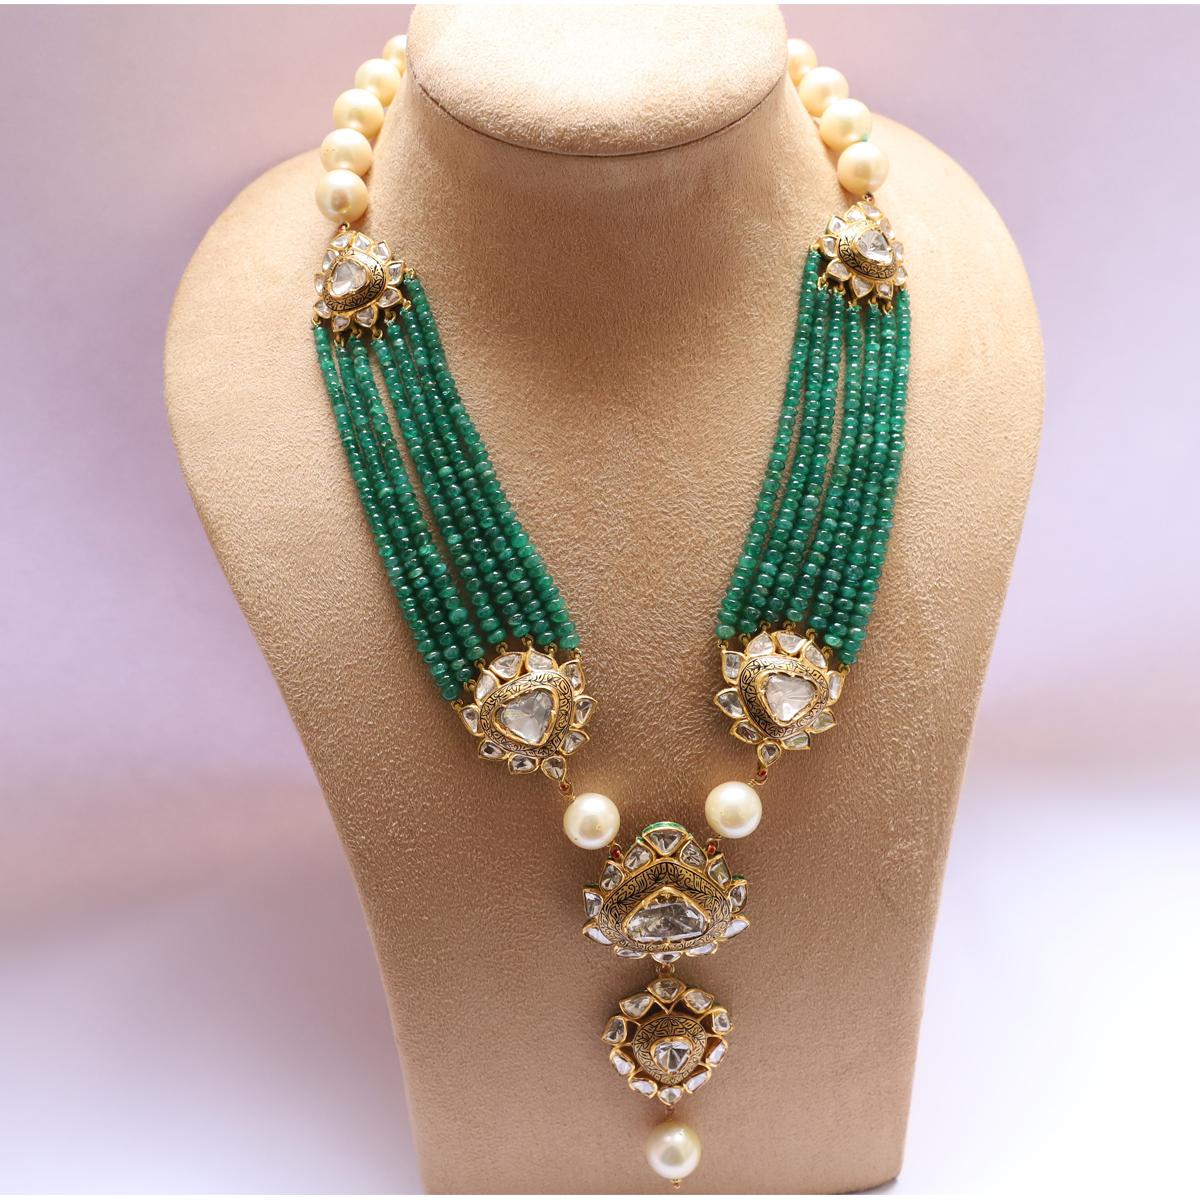 22K Gold Uncut Diamond Necklace Sets -Indian Gold Jewelry -Buy Online